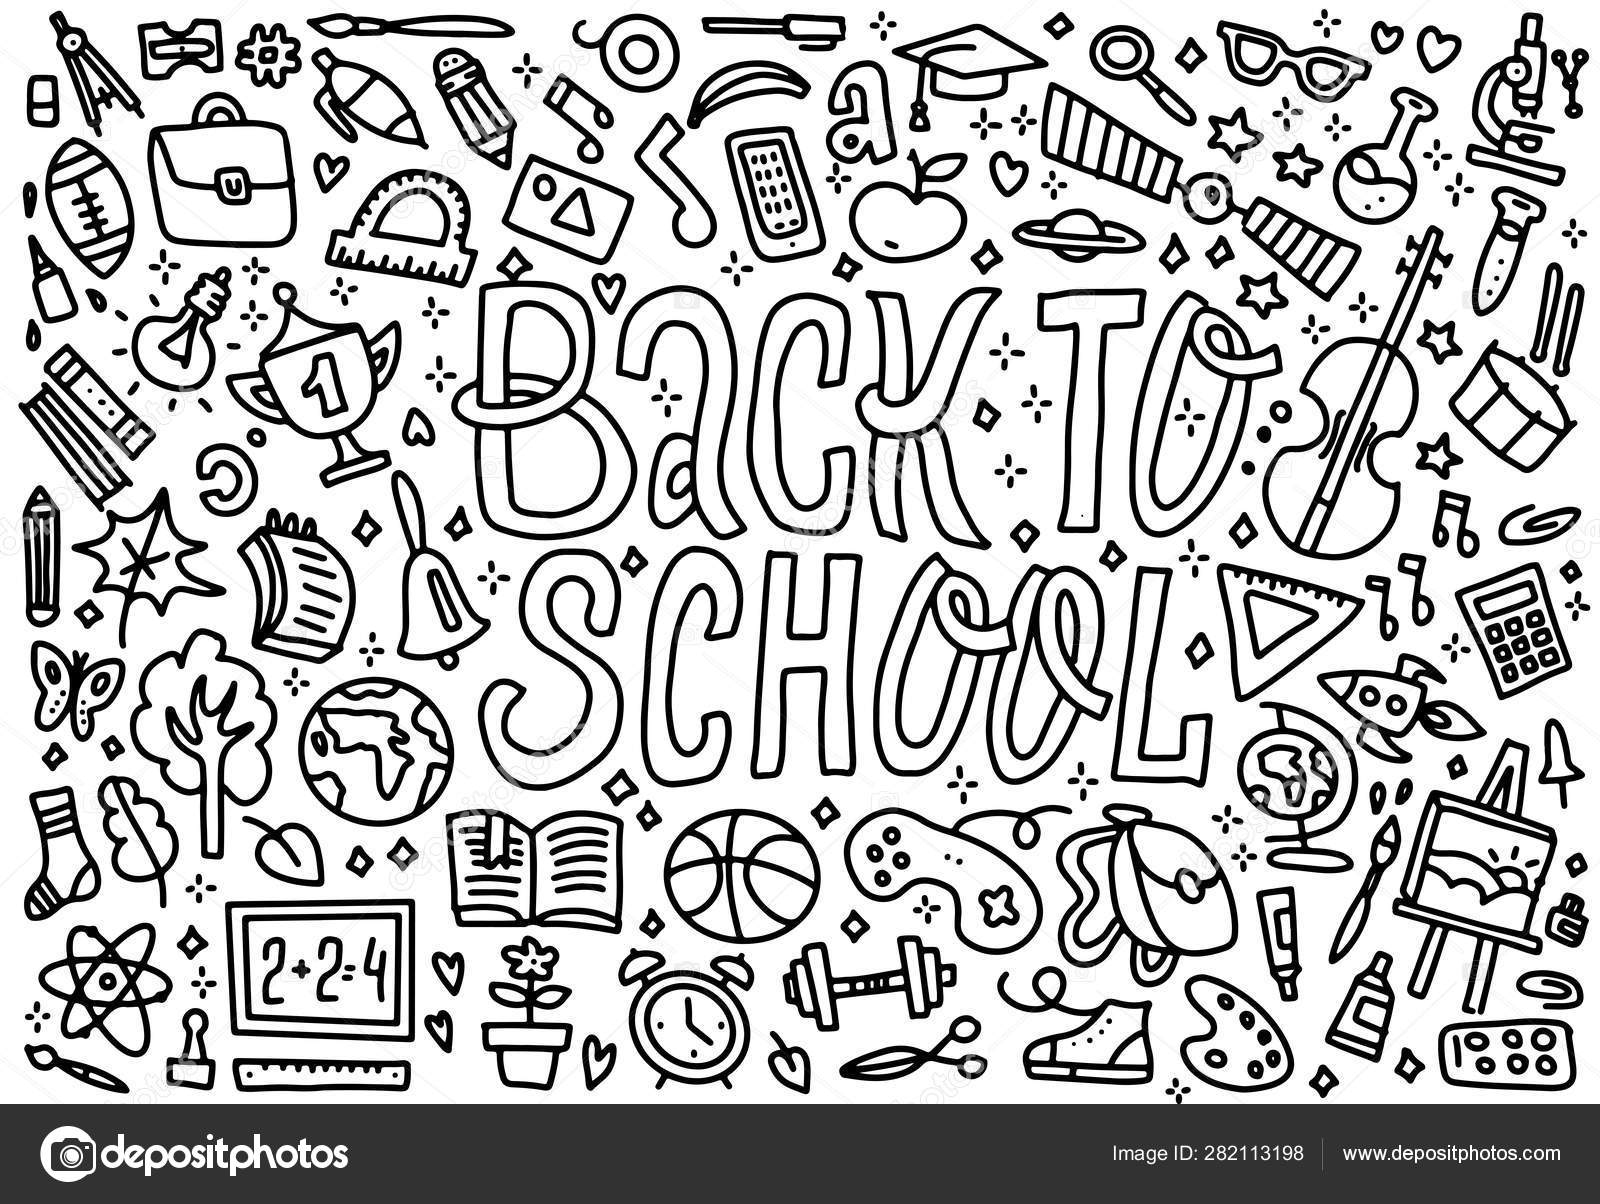 Cartoon Cute Doodles Back To School Word Black And White Horizontal Illustration Background With Lots Of Separate Objects Funny Vector Artwork Concept Of Education With School Supplies Lettering Stock Vector Image